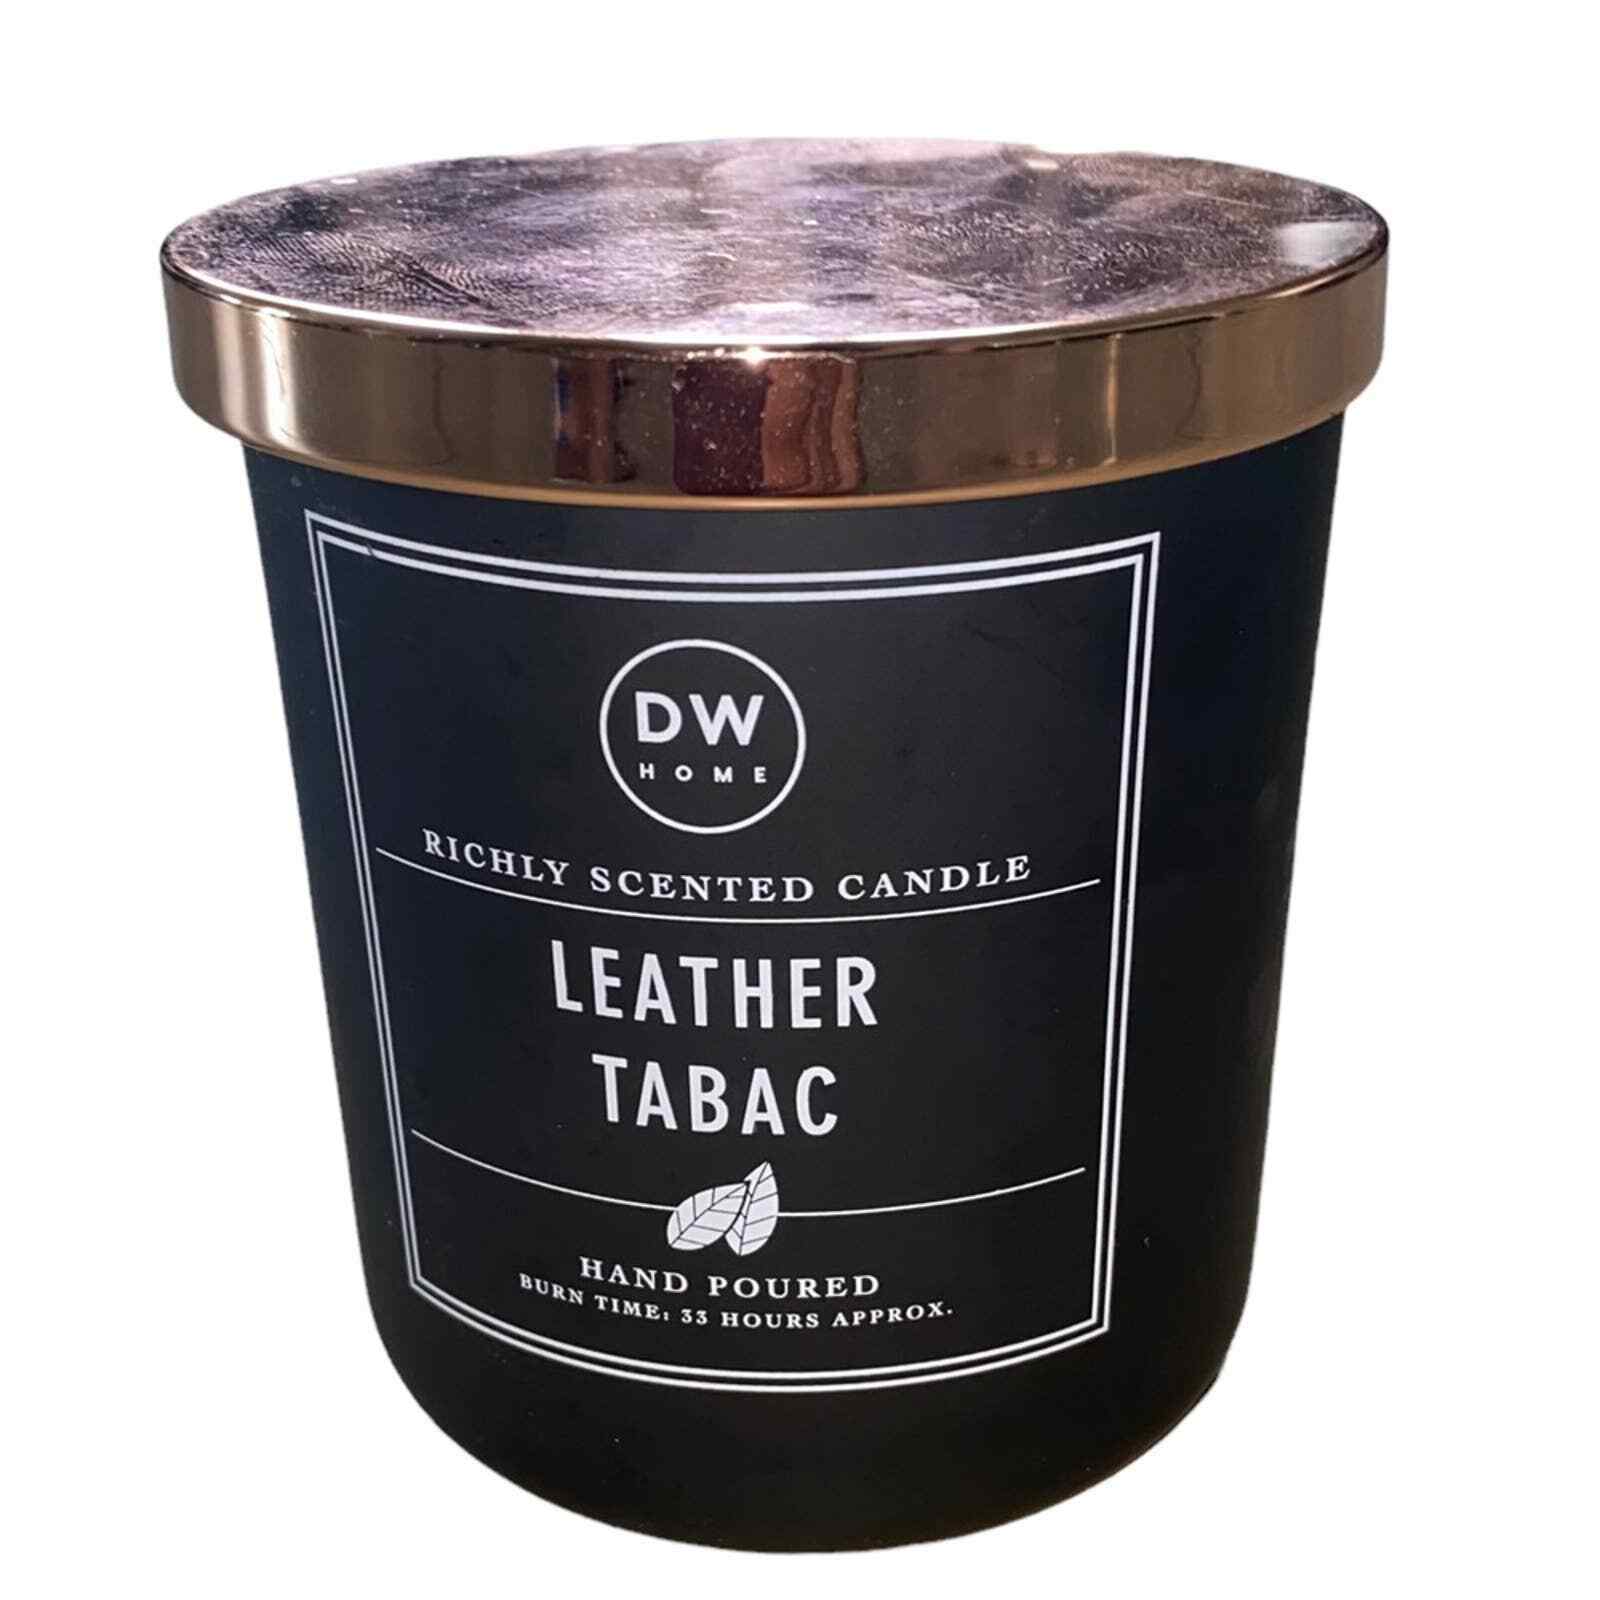 Primary image for DW Home Richly Scented Candle Leather Tabac Hand Poured 9.3 oz burn time 24 hour